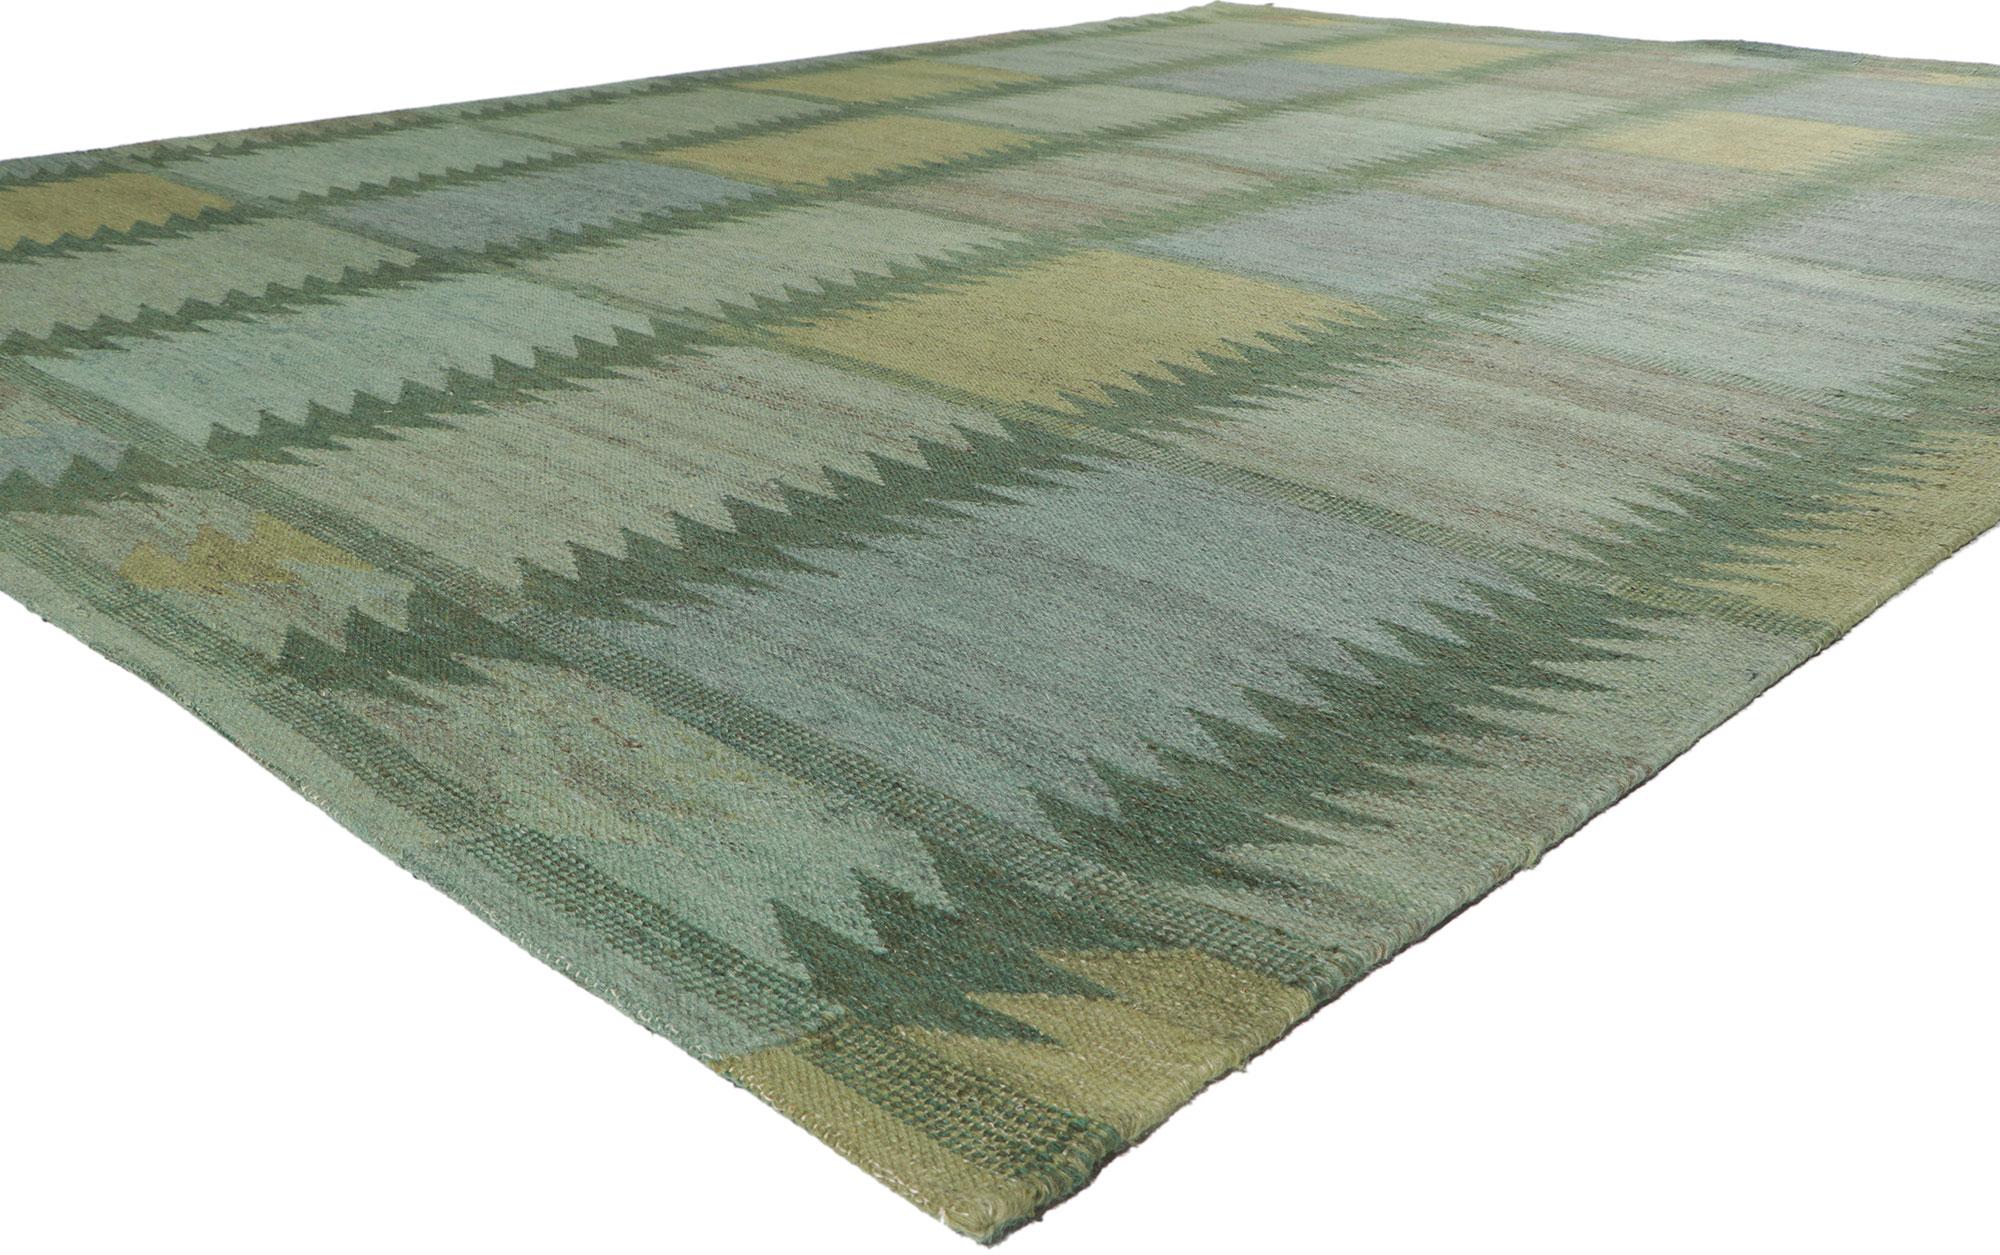 30798 New Swedish Marianne Richter Inspired Kilim Rug 10'02 x 13'07. With its simplicity and geometric design, this hand-woven wool Swedish inspired Kilim rug provides a feeling of cozy contentment without the clutter. The abrashed field features an